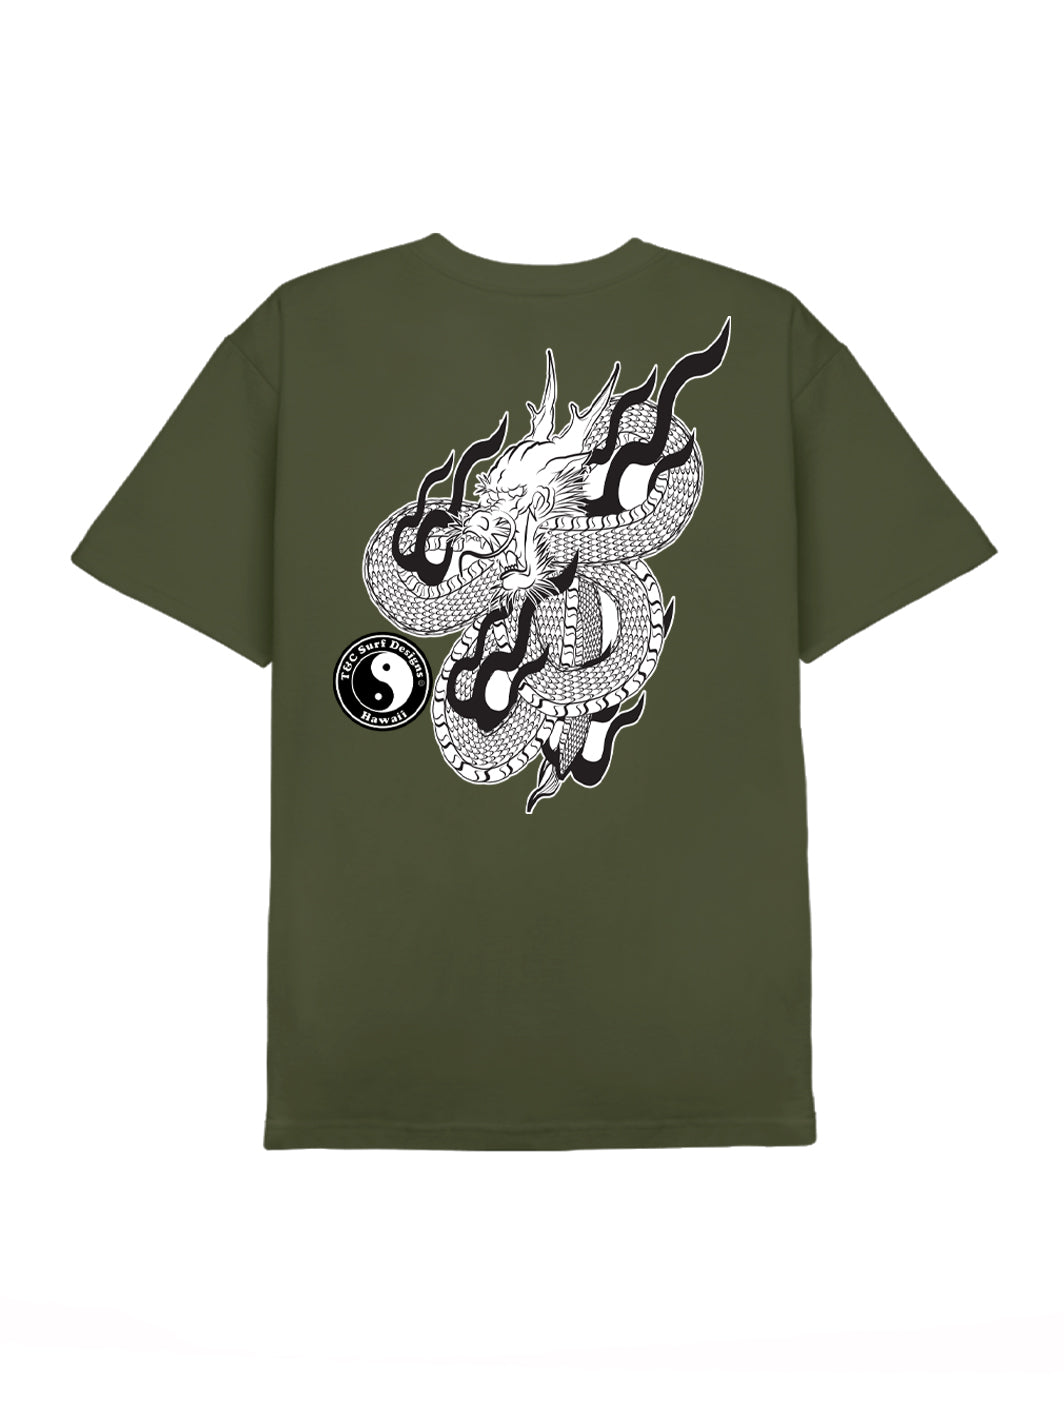 T&C Surf Designs T&C Surf Dragonball Tee, S / Military Green